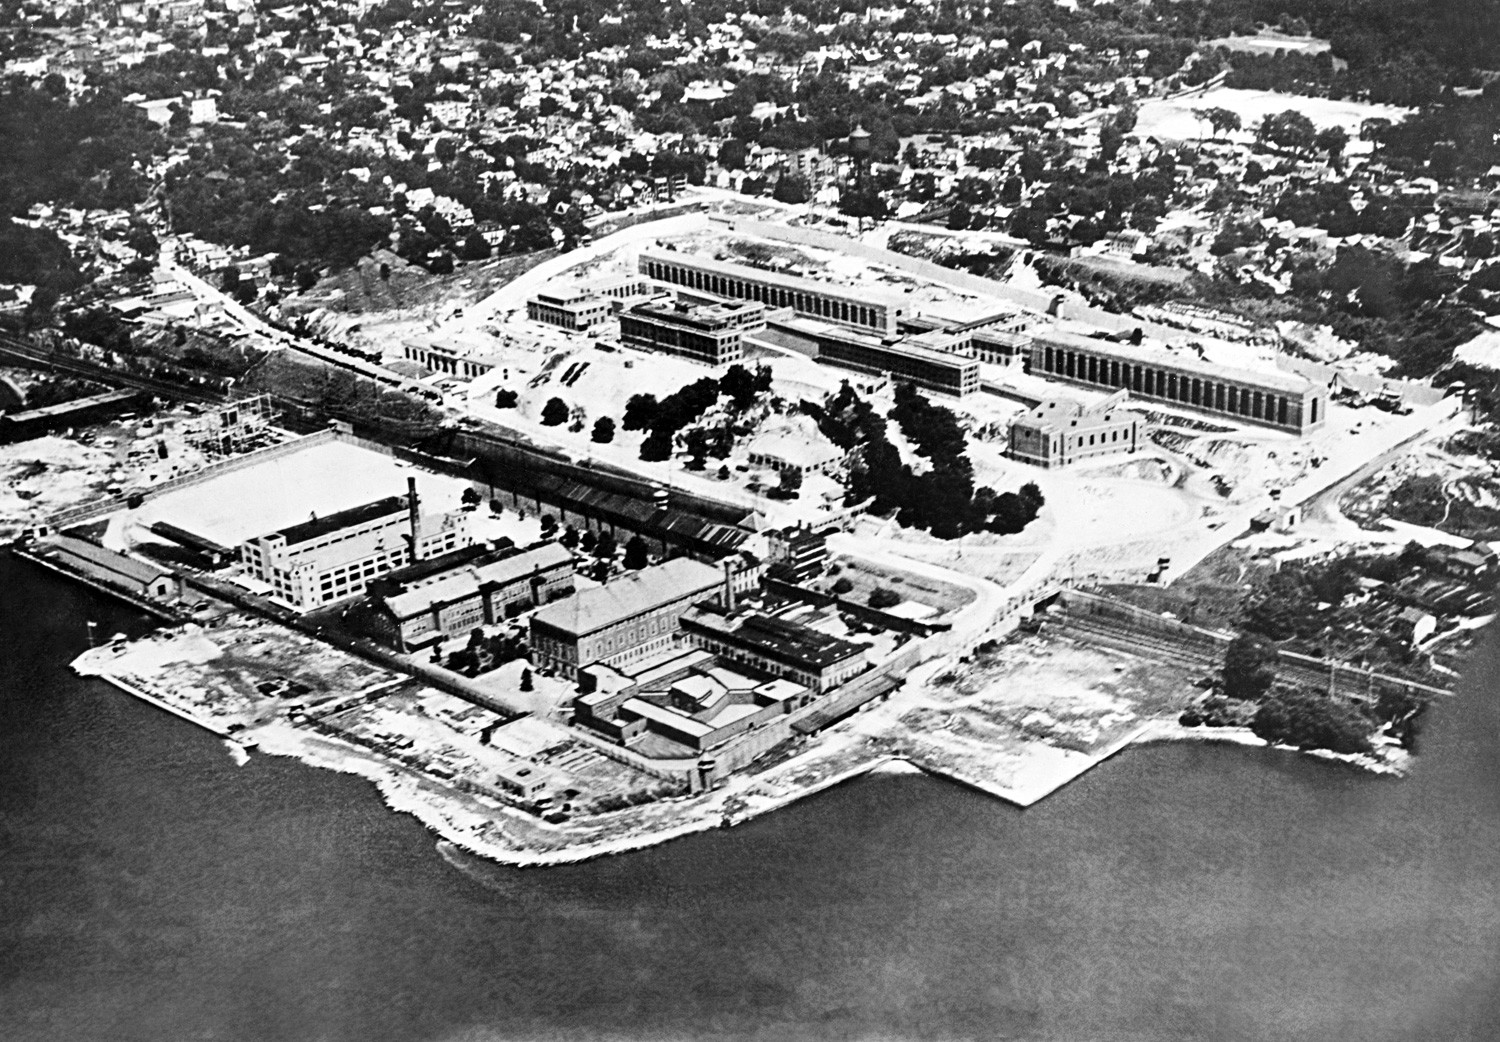 An air view of Sing Sing prison in Ossining, New York, where the Rosenbergs were executed.